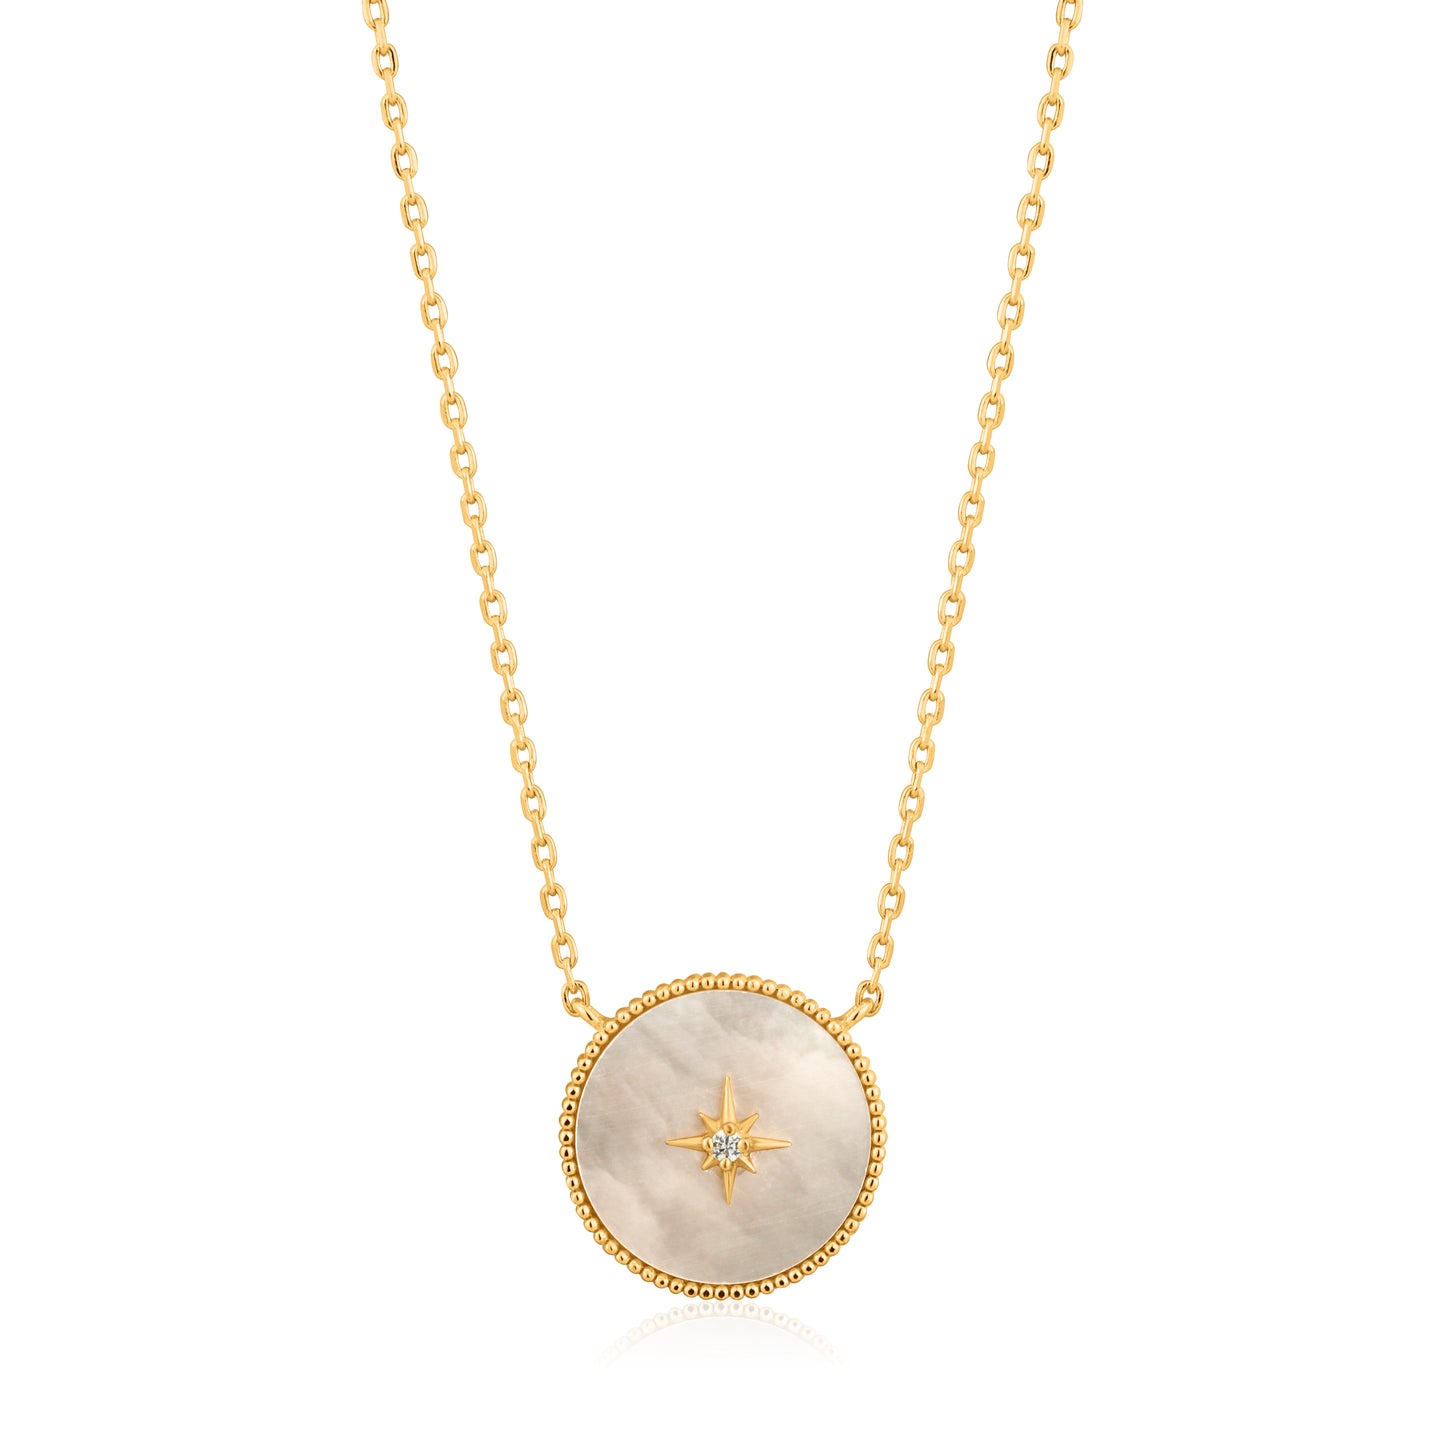 ANIA HAIE ANIA HAIE - Gold Mother Of Pearl Emblem Necklace available at The Good Life Boutique